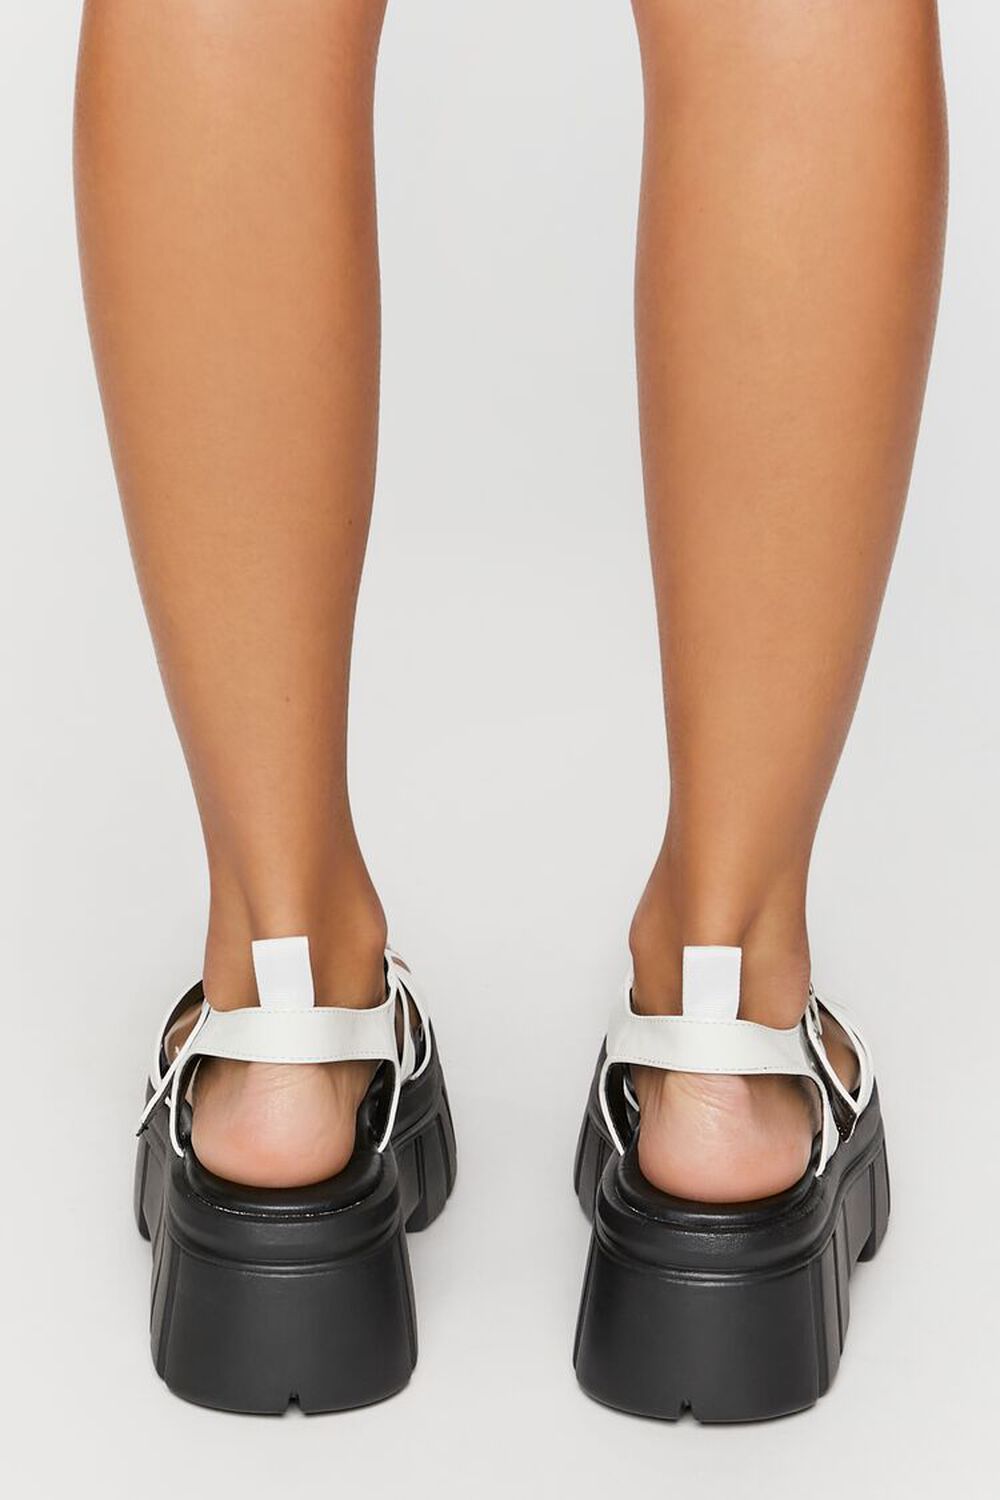 WHITE Faux Patent Leather Caged Lug-Sole Sandals, image 3